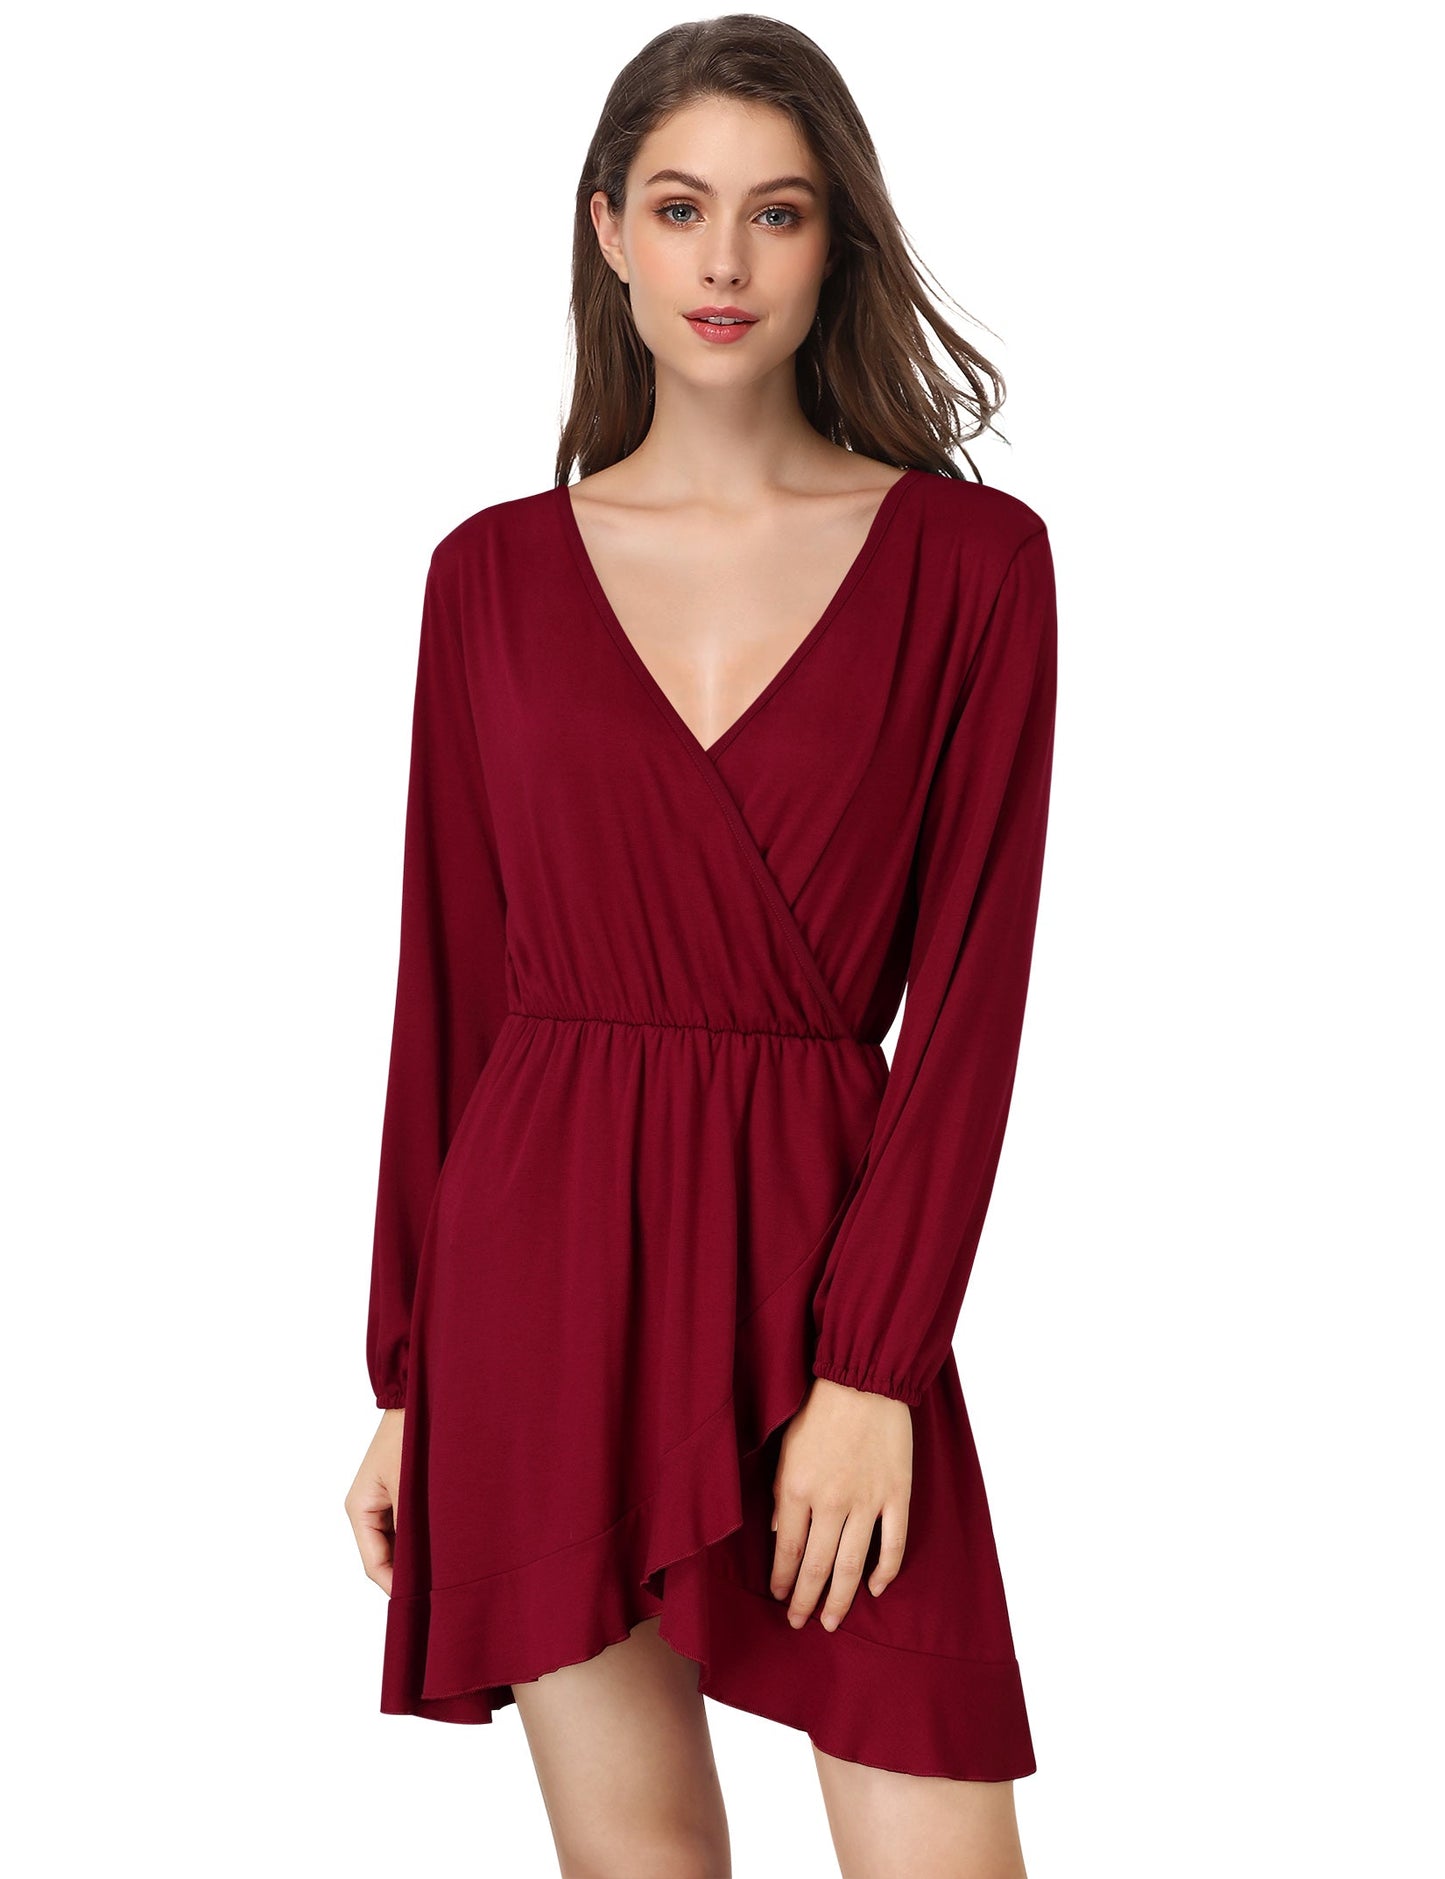 YESFASHION Women's Vneck A-Line Ruffles Cocktail Party Dress Wine Red